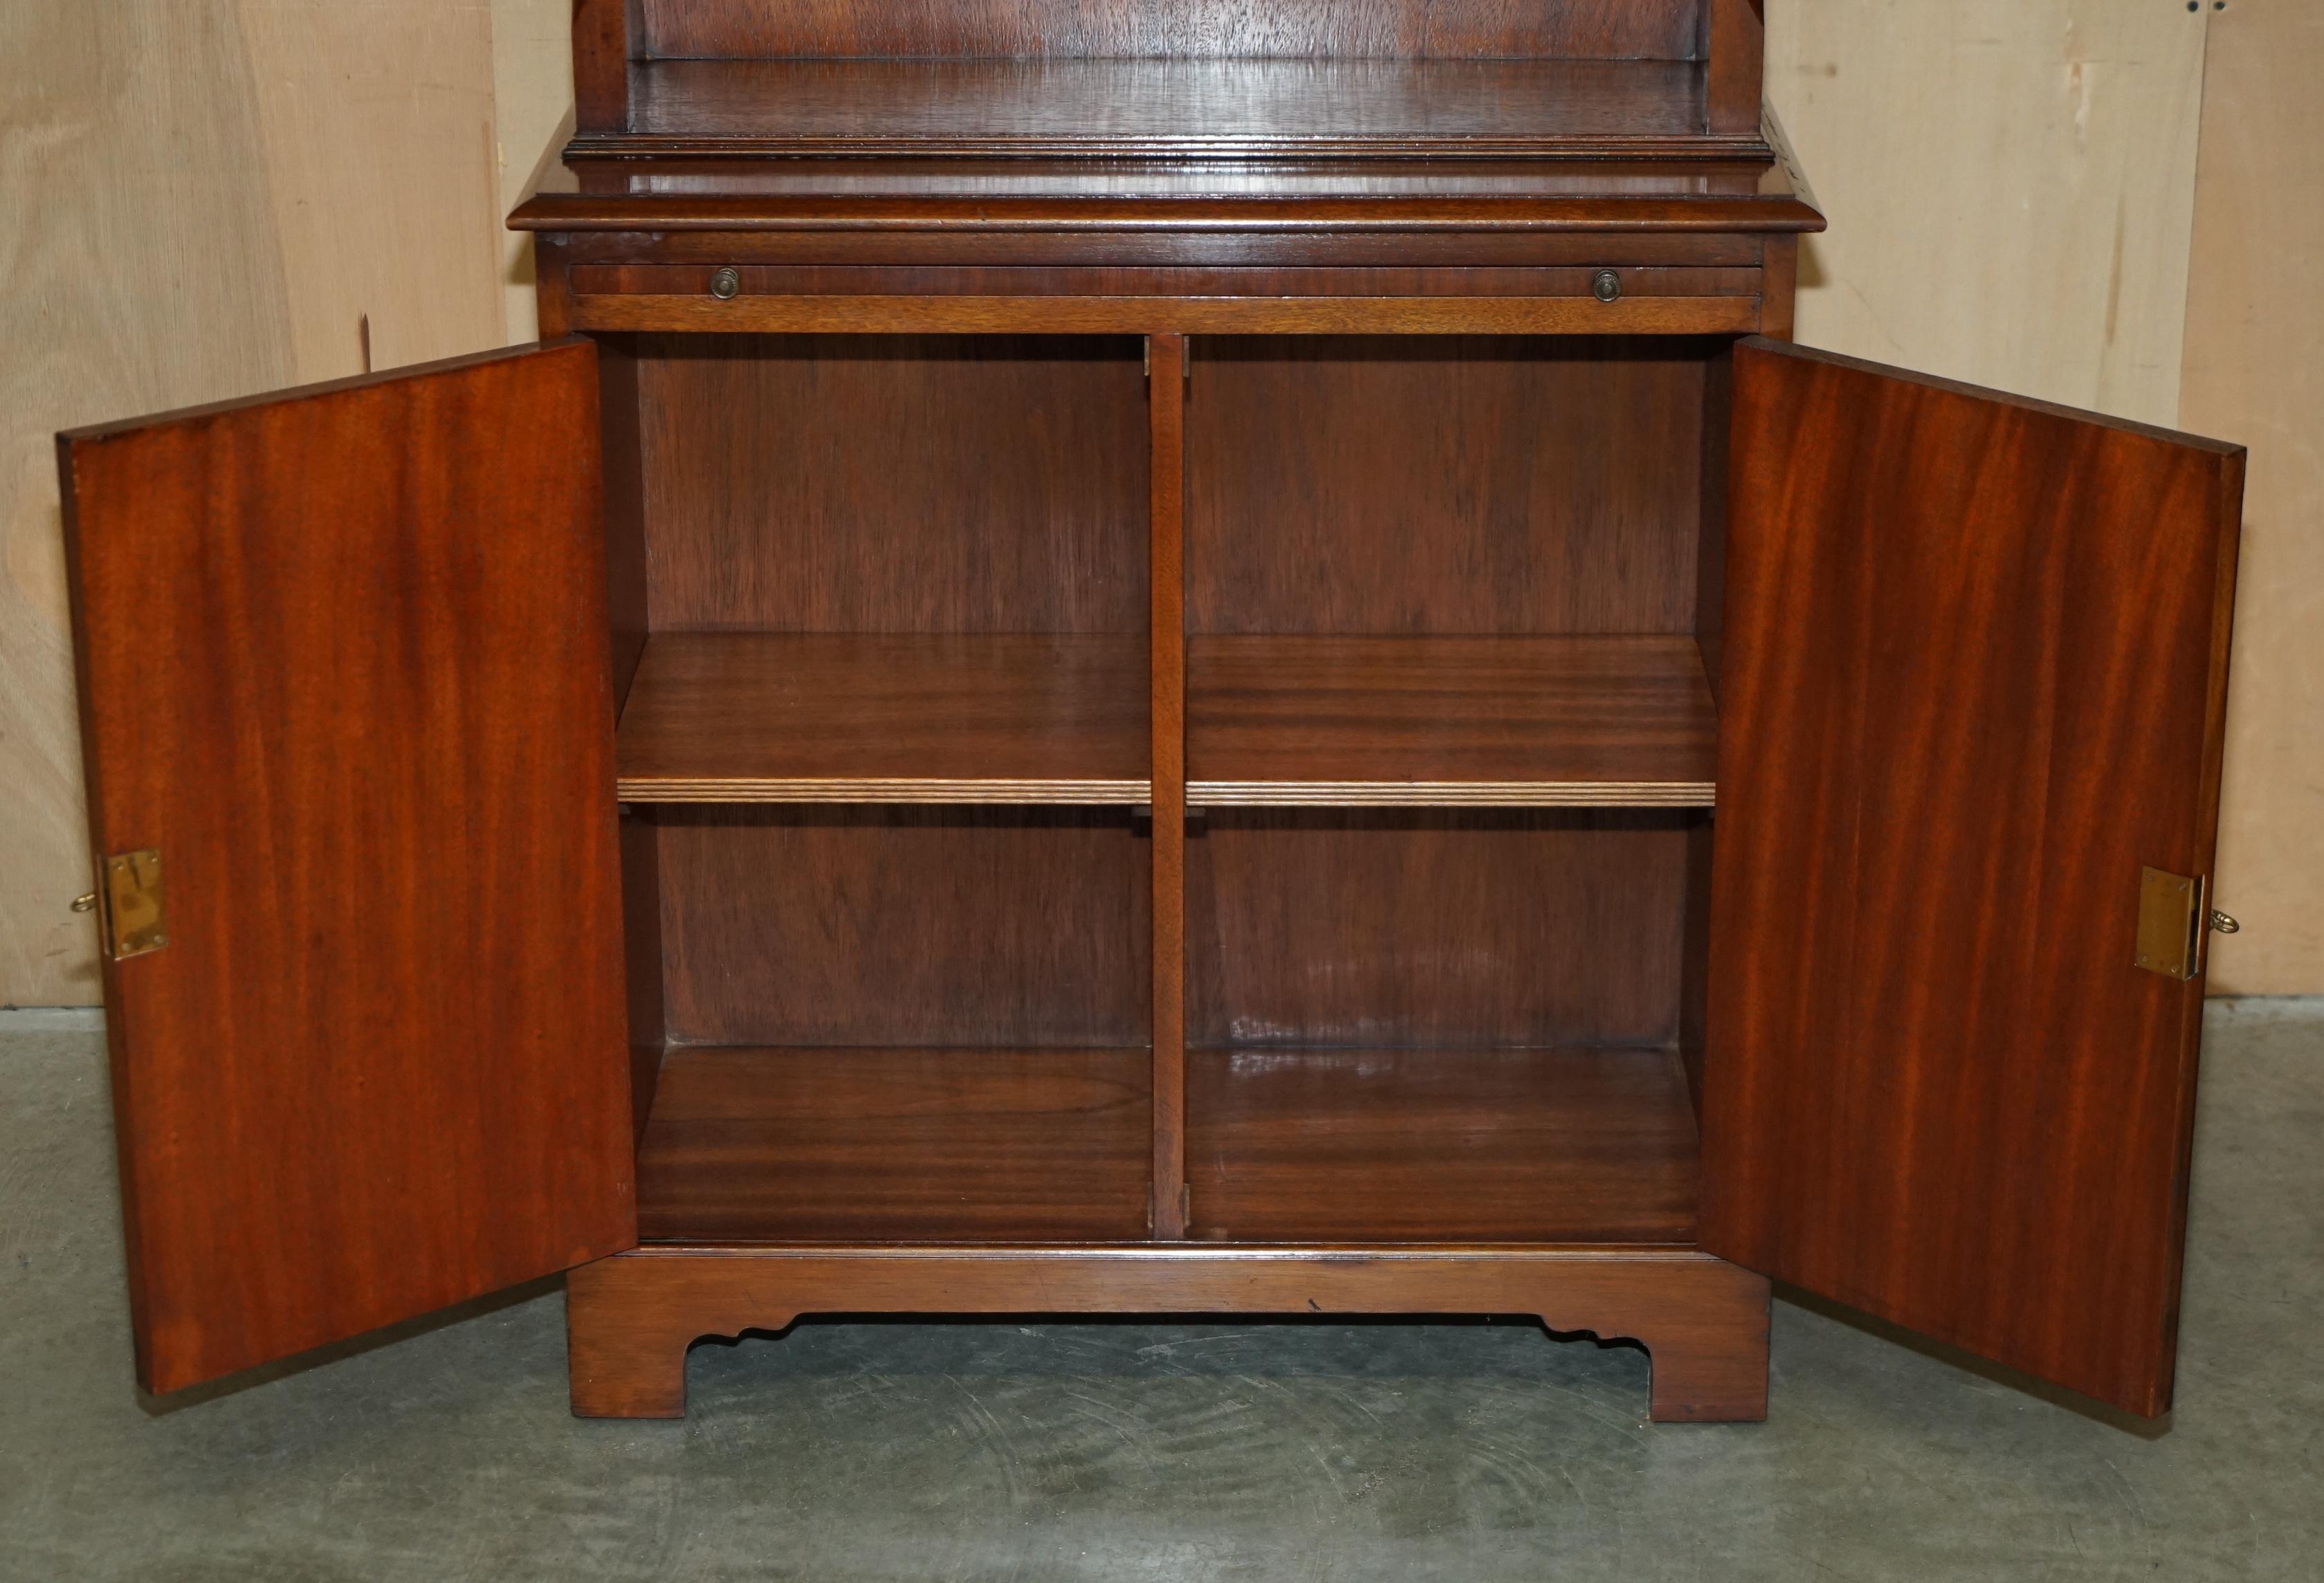 EXQUISITE PAIR OF FLAMED HARDWOOD LIBRARY BOOKCASES SLIP DRiNKS SERVING SHELVES 7